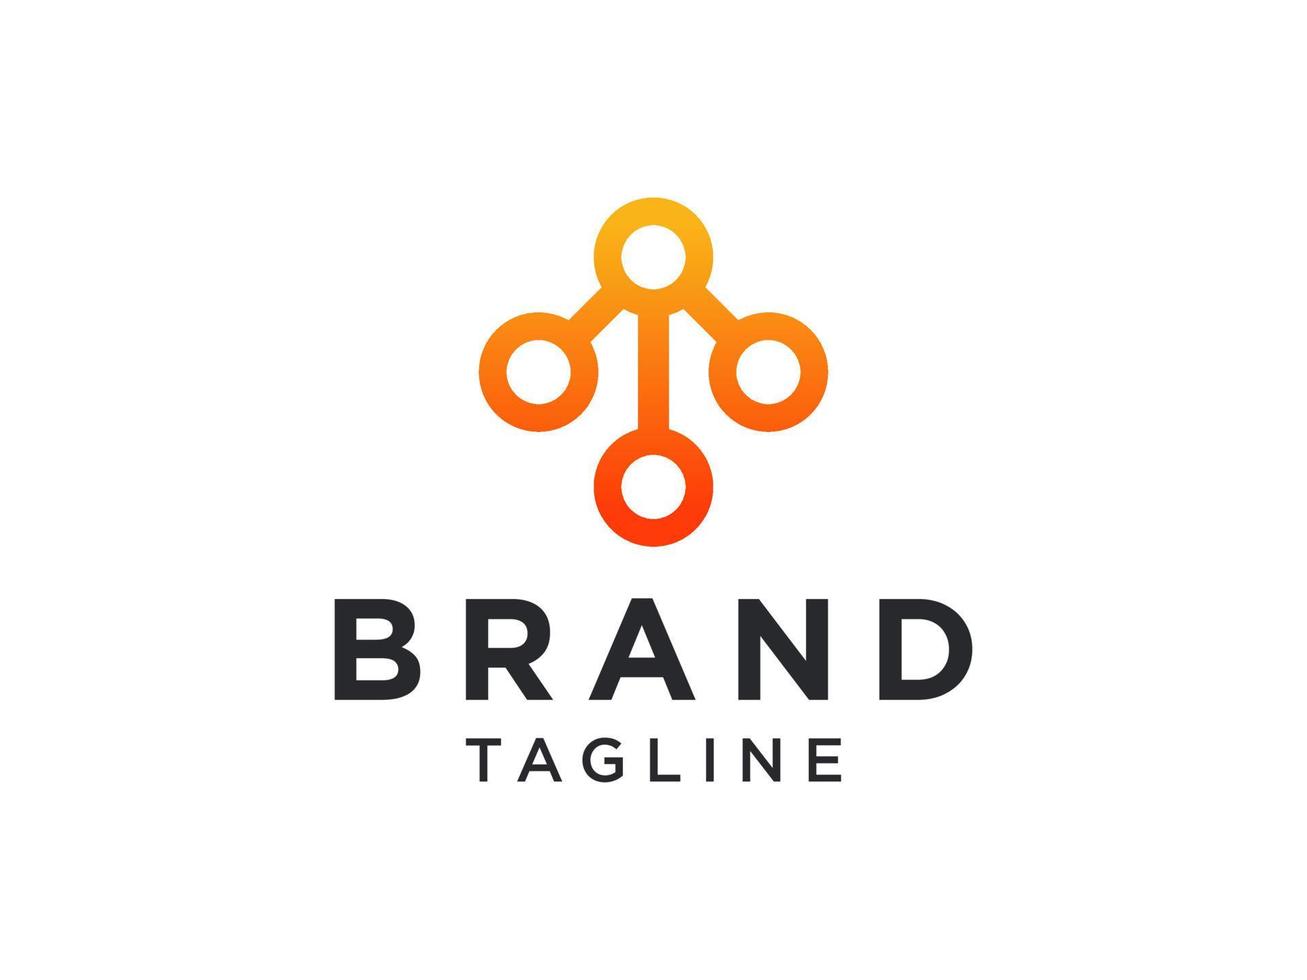 Digital Connecting Logo. Orange Circle Shape with Connected Dots isolated on White Background. Usable for Business and Technology Logos. Flat Vector Logo Design Template Element.